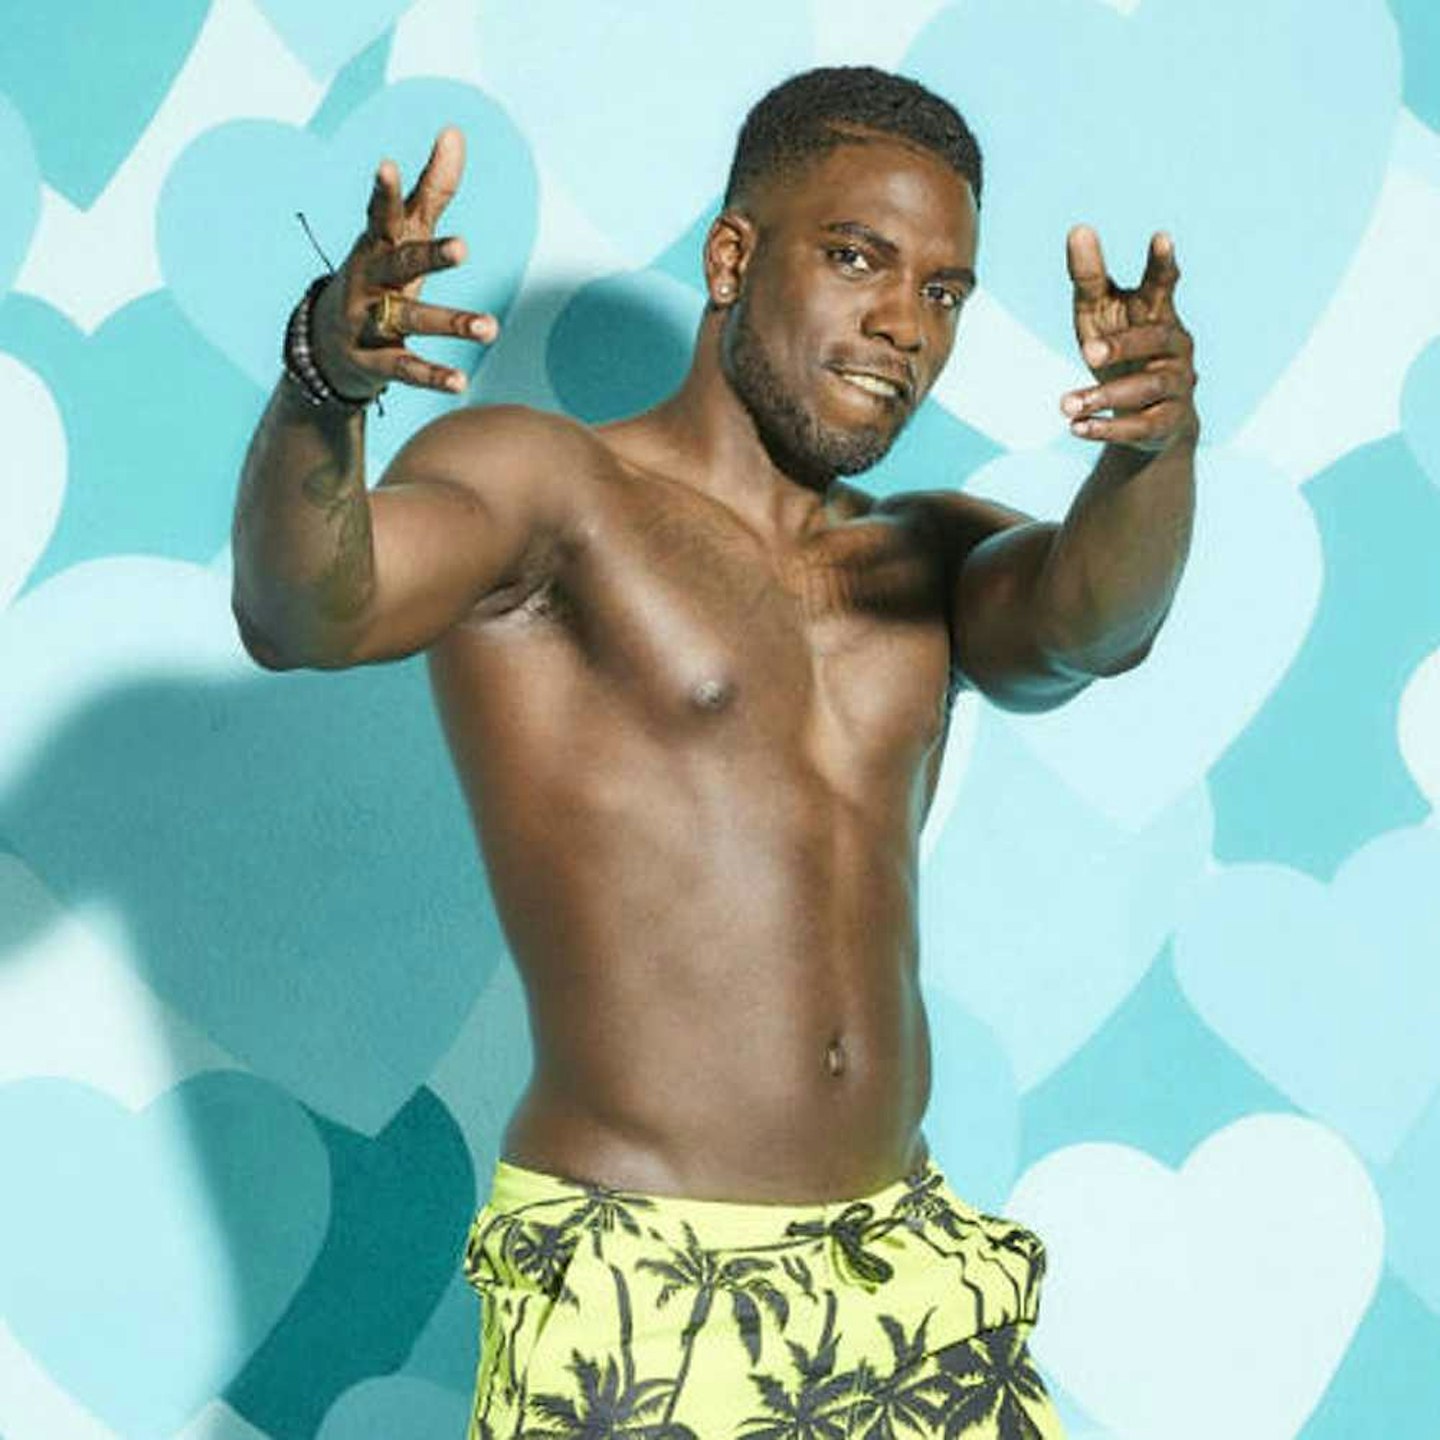 ENTERTAINMENT heatworld's ULTIMATE Love Island Snapchat username list by Ruby Norris | 11 09 2017   Shirtless selfies and bikini snaps galore Love Island is without doubt the standout reality TV show of the summer (Big Brother, CBB, Ex On The Beach we still love you don't worry). Can you think of anything more entertaining than shoving a load of sassy, sexy singletons into a villa and watching them try and cop off with each other to be in with a chance of becoming the last couple standing and taking home the £50,000 prize? No. Obvs not.  (PS, find out everyhting you need to know about the new series here.)  Not only do the islanders form close bonds with each other in the villa (some closer than others wink, wink) but we kinda get a little bit obsessed with them too. Now that it's all over, we want to know everything about them: if the couples are still together IRL, if they all hang out as mates, what they had for breakfast, brunch, lunch and dinner, and the best way to do that is of course on Snapchat.  So, we've done some digging and compiled an ultimate list of Love Island stars' Snapchat usernames and social media handles.  Here ya go!  Love Island Snapchat Usernames Caroline Flack Snapchat username  Let's kick things off with our Love Island host and all-round MEGA BABE Caroline Flack.  Snapchat: flickflack  Twitter: @carolineflack1  Instagram: @carolineflack  Iain Stirling aka Love Island Voice Over Guy Snapchat username Next up is the absolutely, bloody hilarious Iain Stirling. He's responsible for the witty commentary basically taking the piss out of all the islanders. Lolol.  Snapchat: Iaindoesjokes  Twitter: @IainDoesJokes  Instagram: @iaindoesjokes  Georgia Harrison Snapchat username Snapchat: n/a  Twitter: @glharrisonx  Instagram: @glharrisonx  Jamie Jewitt Snapchat username Snapchat: n/a  Twitter: @jamielukejewitt  Instagram: @jamiejewitt_  Theo Campbell Snapchat username Snapchat: n/a  Twitter: @theocampbel  Instagram: @theo_campbell91  Rob Lipsett Snapchat username Snapchat: n/a  Twitter: @RobLipsett  Instagram: roblipsett   Steve Ball Snapchat username Snapchat: steveball_92  Twitter: @steveball_92  Instagram: steveball92   Alex Beattie Snapchat username Snapchat: n/a  Twitter: n/a  Instagram: alex.beattie   Nathan Joseph Snapchat username Snapchat: n/a  Twitter: @natjoseph  Instagram: nat_joseph   Craig Lawson Snapchat username Snapchat:craiglawsonpt  Twitter: @thetattooedpt  Instagram: thetattooedpt   Marino Kastsouris Snapchat username Snapchat: n/a  Twitter: @marlnokatsouris  Instagram: marino_katsouris   Shannen Reilly Mcgrath Snapchat username Snapchat: n/a  Twitter: @ShannenReillyM  Instagram: shannenreillymcgrath   Chyna Ellis Snapchat username Snapchat: n/a  Twitter: @chynaellis_  Instagram: chynaellis_   Amelia Peters Snapchat username Snapchat: apetersx  Twitter: @amelia_peters  Instagram: ameliapeters1   Ellisha-Jade White Snapchat username Snapchat: n/a  Twitter: @thesotongirl  Instagram: thesouthamptongirl   Danielle Sellers Snapchat username Snapchat: n/a  Twitter: @DanieIleSellers  Instagram: daniellejsellers   Tyla Carr Snapchat username Snapchat: n/a  Twitter:TylaRosieCarr  Instagram:tylarosie   Simon Searles Snapchat username Snapchat: n/a  Twitter: simonsearles1  Instagram: sisearles   Mike Thalassitis aka 'Muggy Mike' Snapchat username Snapchat: n/a  Twitter: MikeThalassitis  Instagram: mike_thala   Gabrielle ALlen Snapchat username Snapchat: n/a  Twitter: @gabbydawnallen  Instagram: @gabbydawnallen  Tyne-Lexi Clarson Snapchat username Snapchat: n/a  Twitter: @tlc_xxx  Instagram: @tyne_lexy_clarson  Jonny Mitchell Snapchat username Snapchat: n/a  Twitter: @jonnyVmitchell  Instagram: @jonny_mitchell1991  (CREDIT: ITV) u00a9 ITV Chris Hughes Snapchat username Snapchat: hchris22  Twitter: @chrishughes_22  Instagram: @chrishughes_22  (CREDIT: ITV) u00a9 ITV Olivia Attwood Snapchat username Snapchat: n/a  Twitter: @oliviajade_att  Instagram: @oliviajade_attwood  u00a9 ITV Chloe Crowhurst Snapchat username Snapchat: n/a  Twitter: @ChloeCrowhurst_  Instagram: @chloecrowhurstx  u00a9 ITV Montana Brown Snapchat username Snapchat: Montanarosebrow  Twitter: @montanaroseb  Instagram: @montanarosebrown1  u00a9 ITV Jessica Shears Snapchat username Snapchat: jessicaroseuk  Twitter: @Jessica_Rose_UK  Instagram: @jessica_rose_uk  u00a9 ITV Camilla Thurlow Snapchat username Snapchat: n/a  Twitter: @CamillaThurlow  Instagram: @camillathurlow  u00a9 ITV Amber Davies Snapchat username Snapchat: amber_davies7  Twitter: @Amber_Davies7  Instagram: @amb_d  u00a9 ITV Marcel Somerville Snapchat username